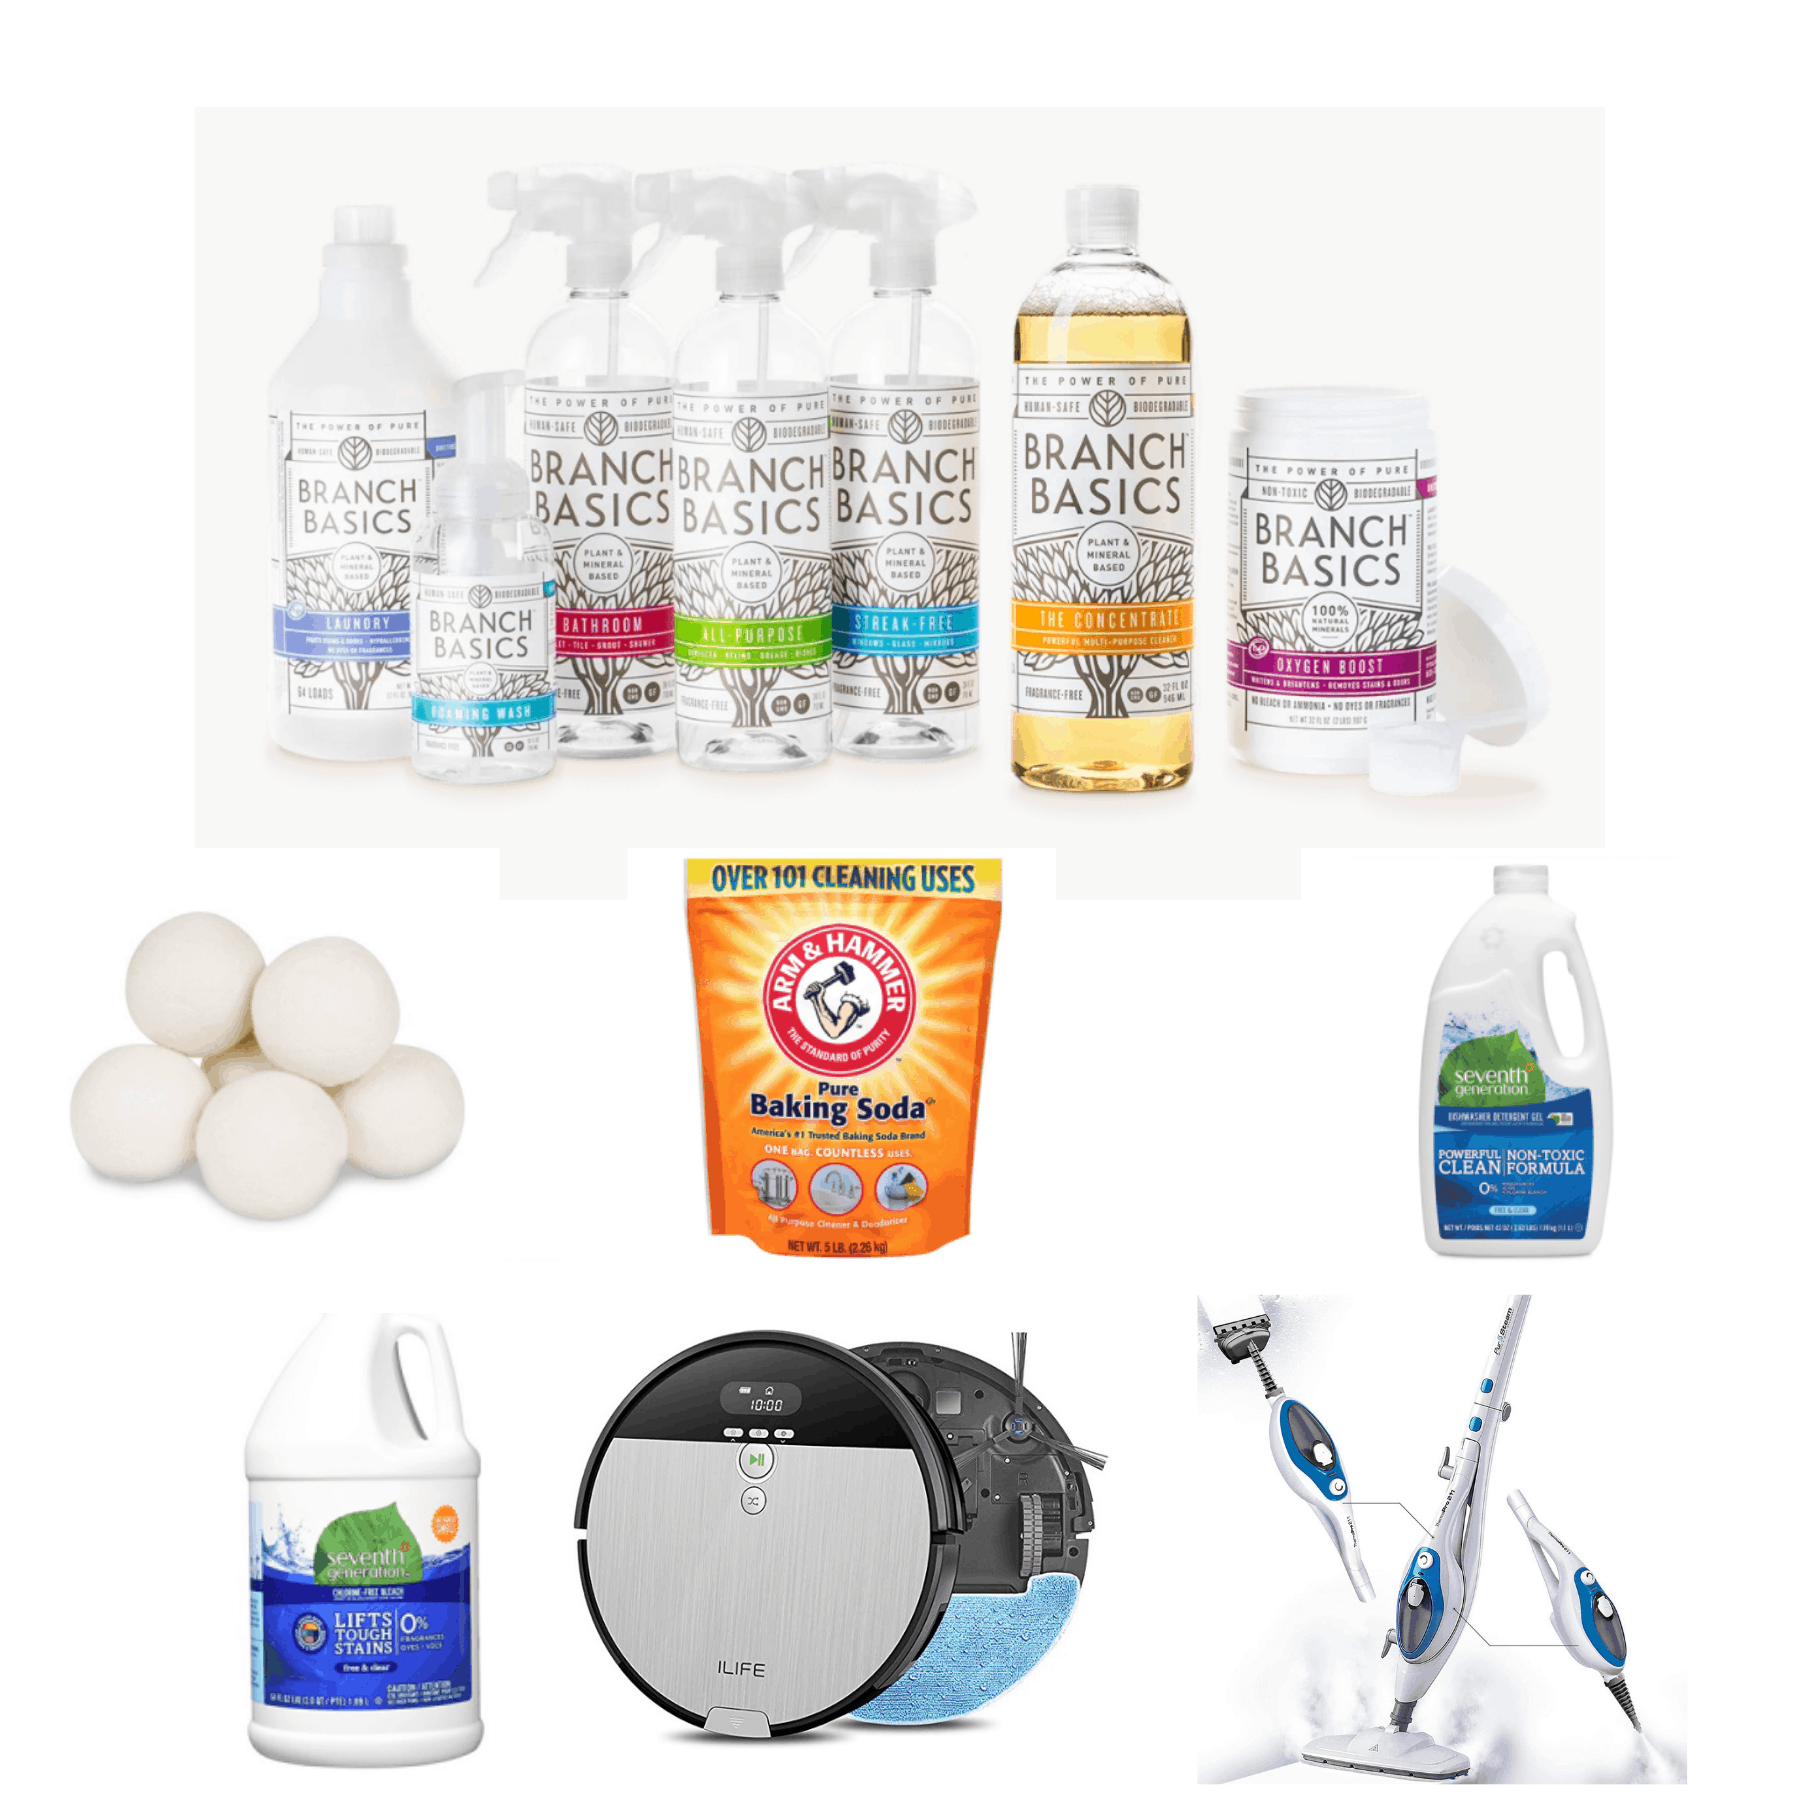 https://www.tasteslovely.com/wp-content/uploads/2019/03/TOXIC-FREE-CLEANING-FAVORITES-1.png